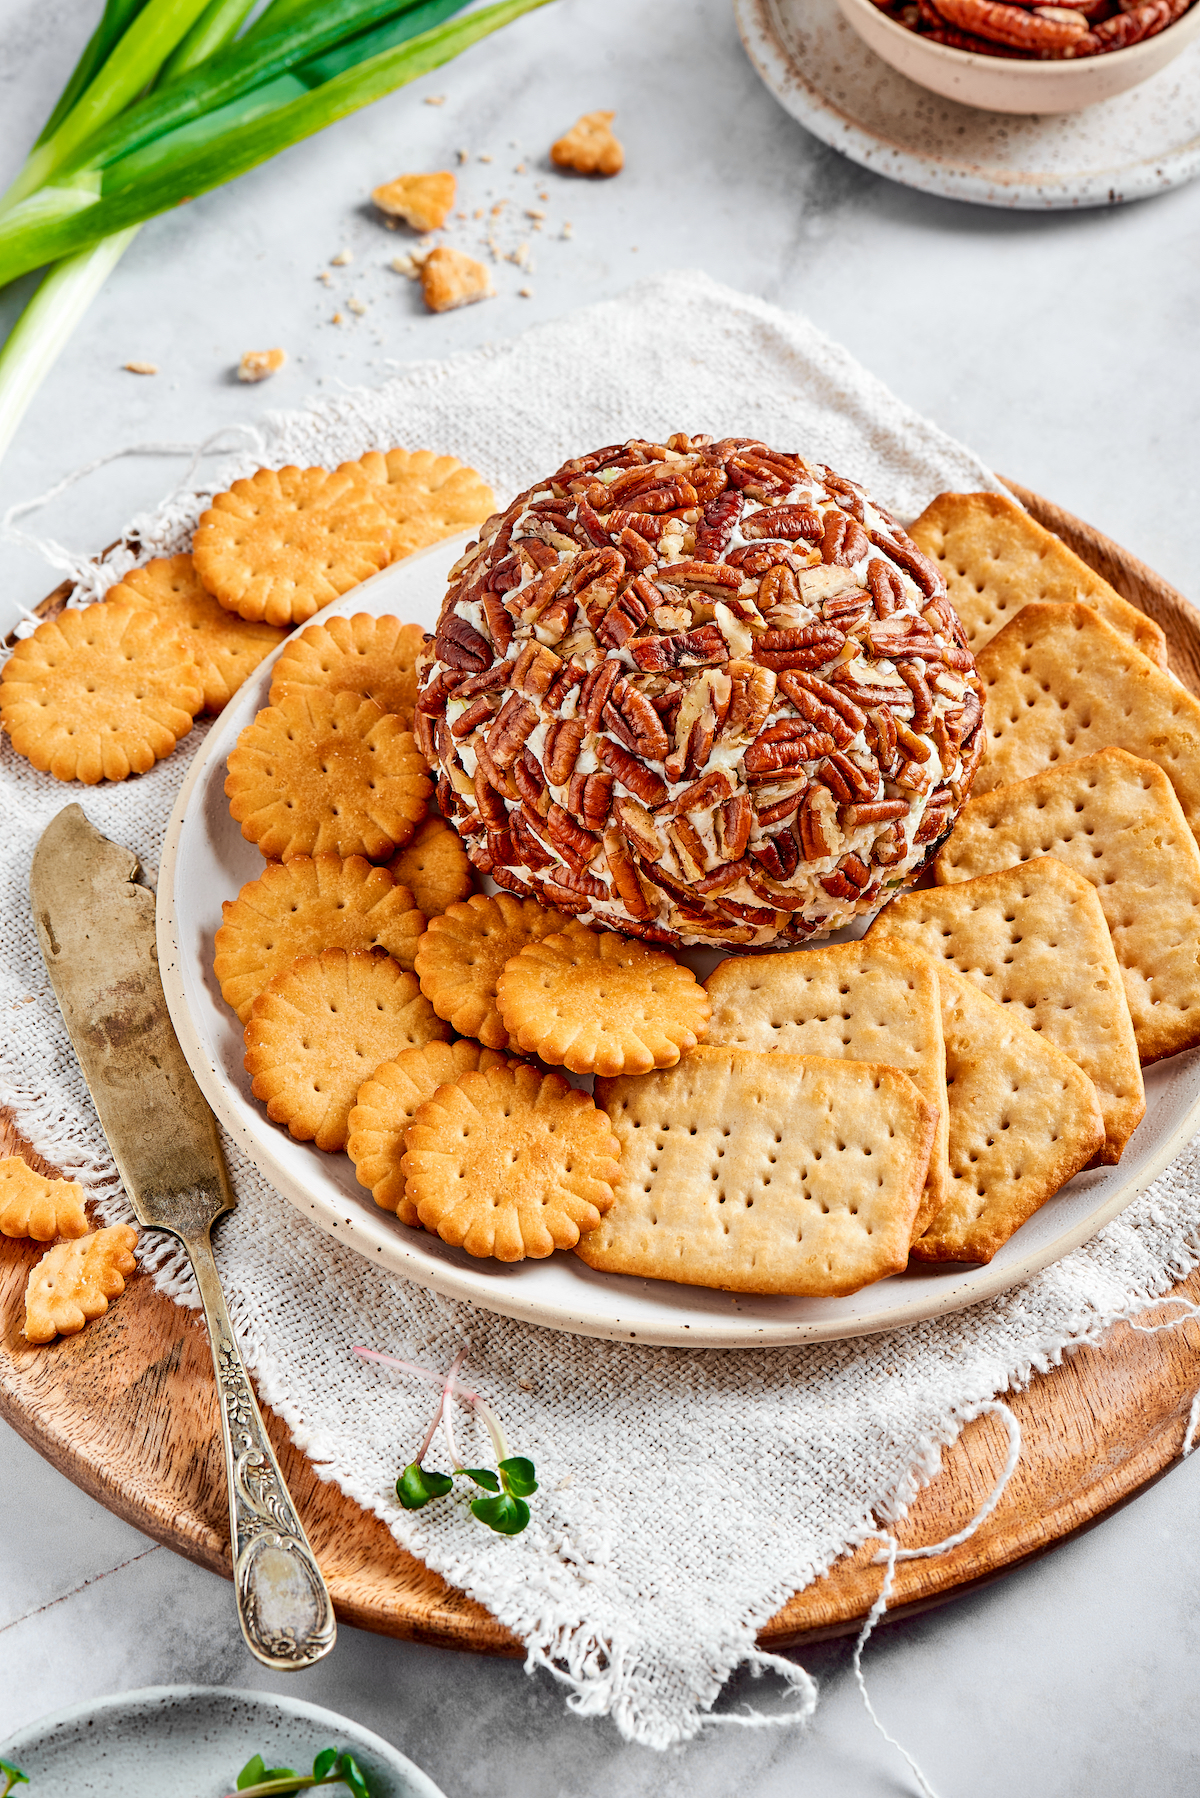 Best Easter Cheese Ball Recipe - How To Make An Easter Cheese Ball